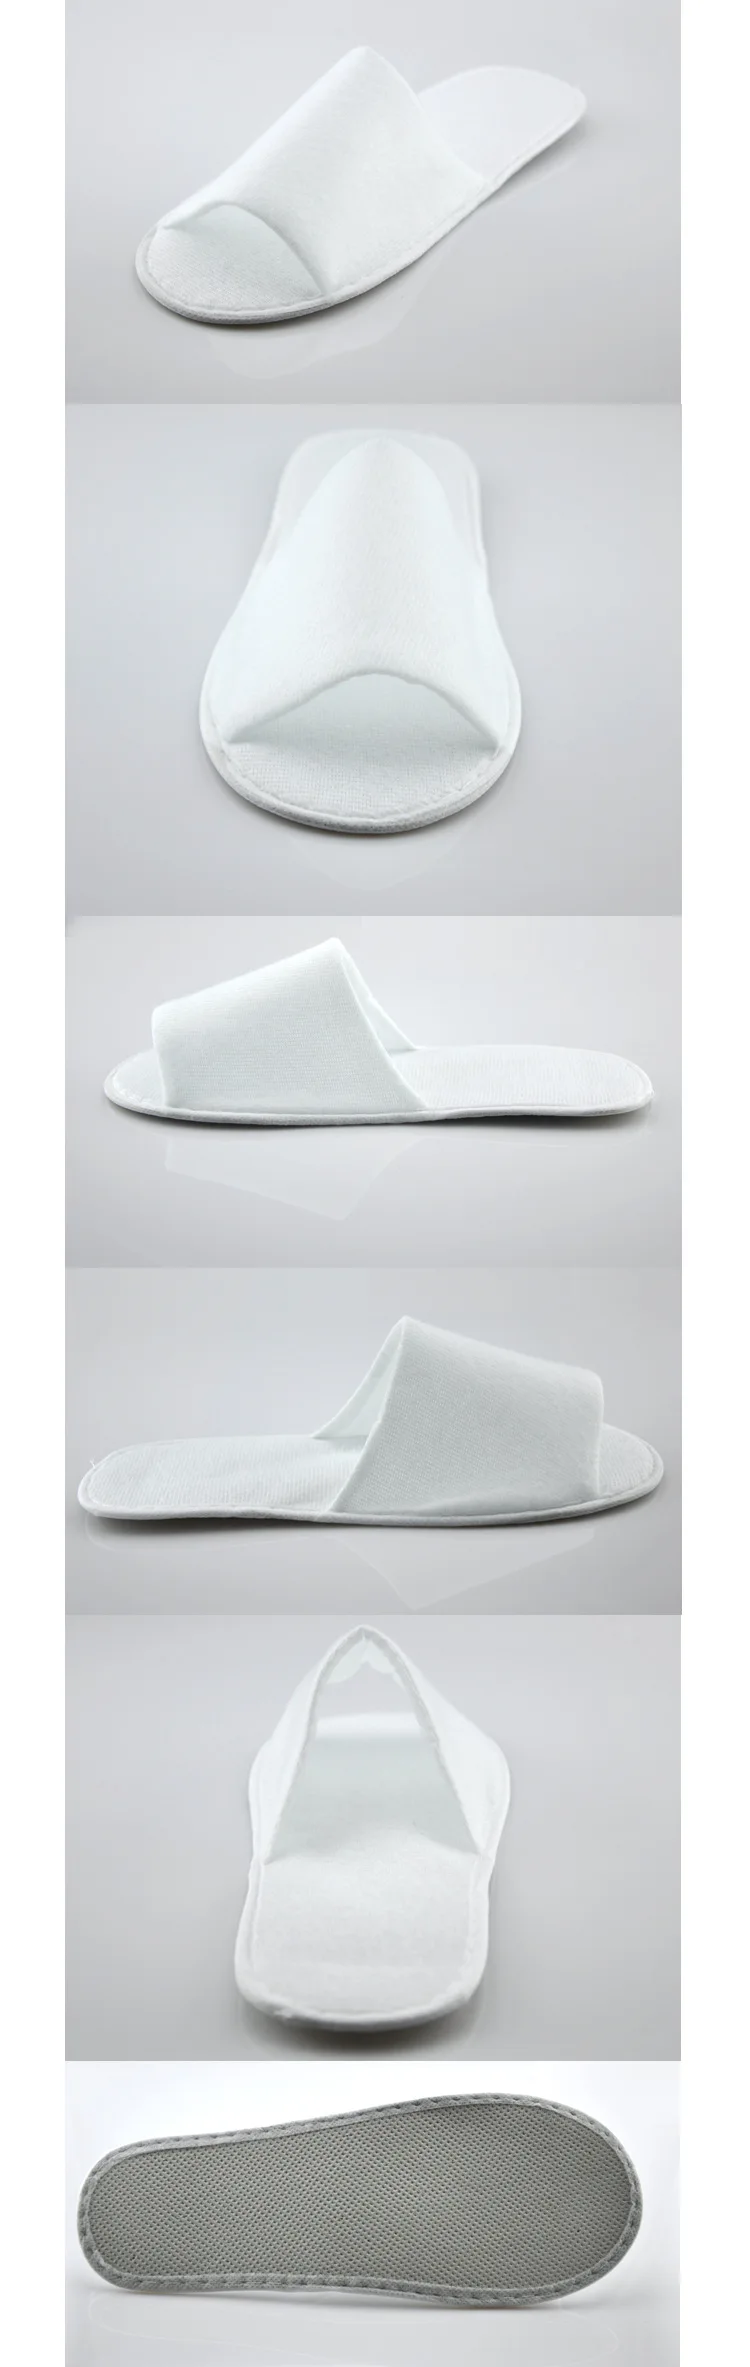 Hotels and hotels room consumables disposable slippers white non-woven fabric anti-skid thickening wholesale direct sales